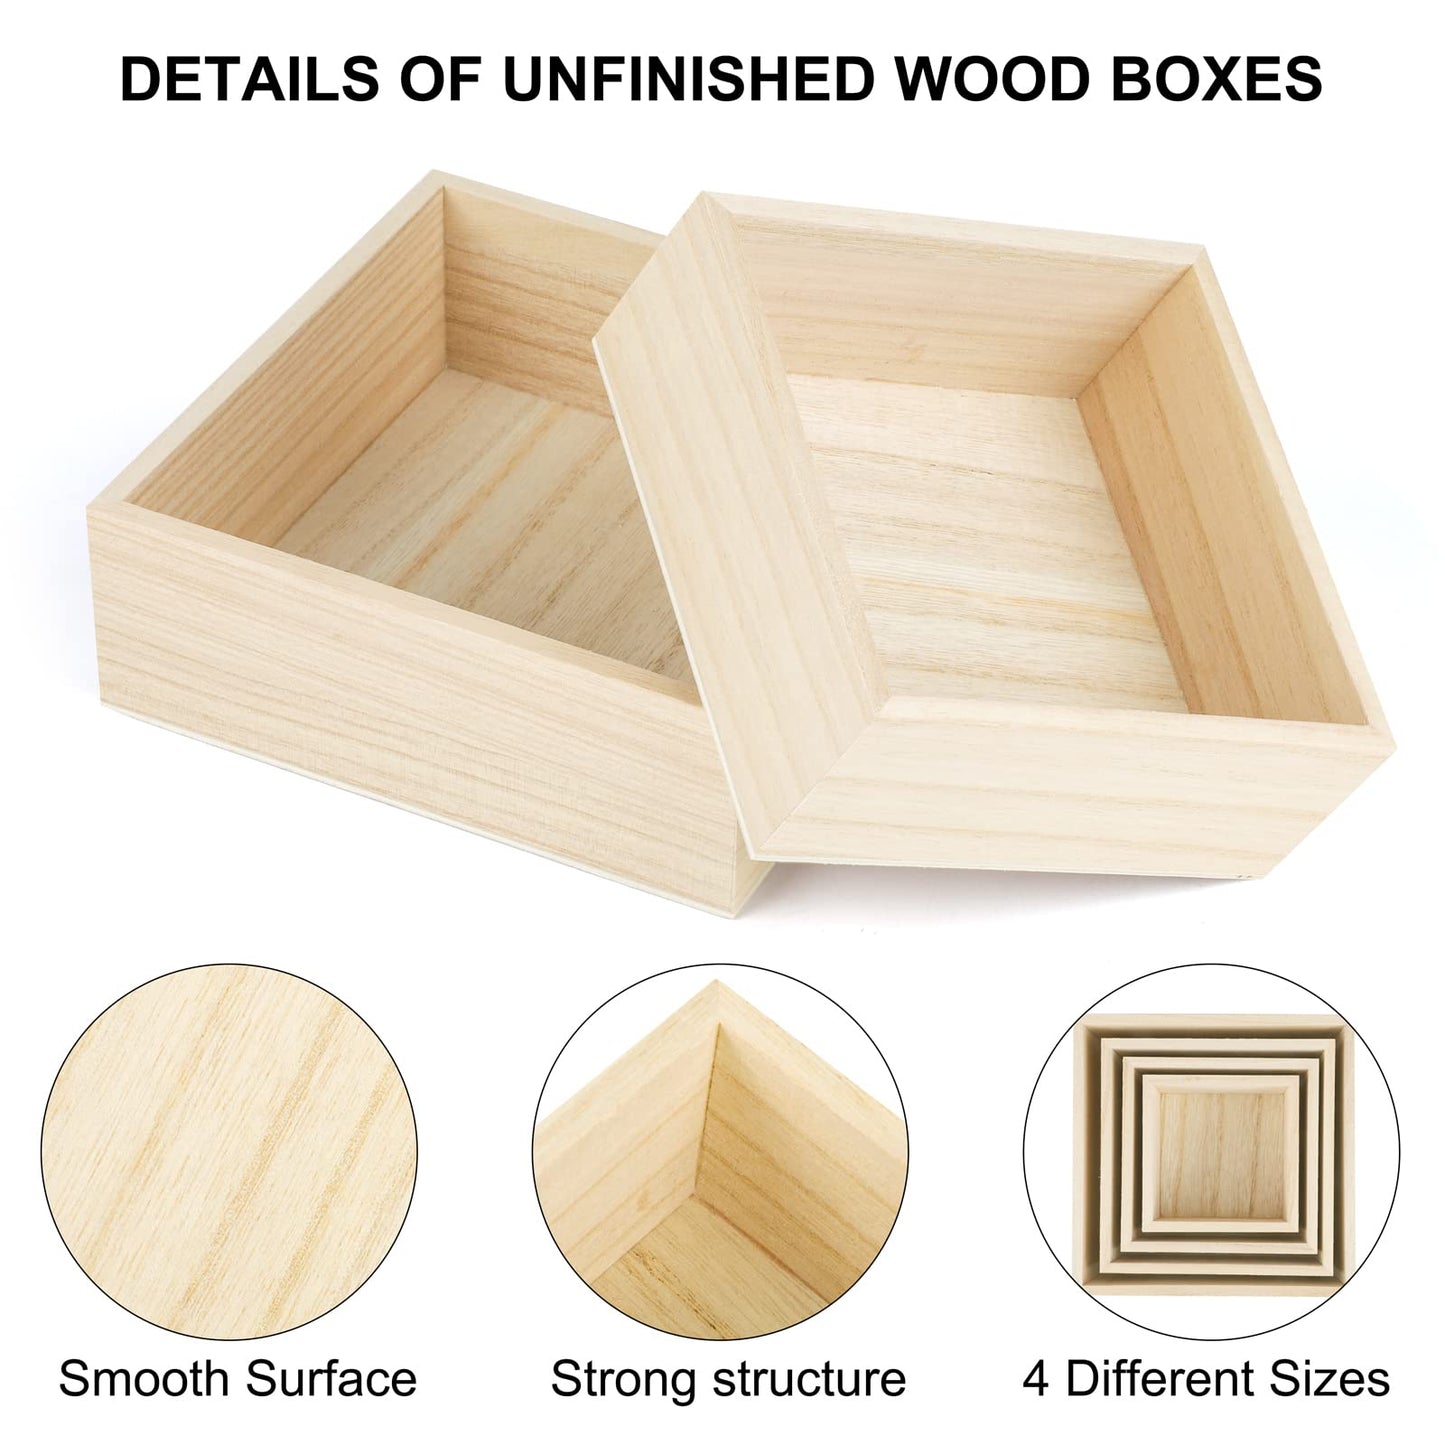 Aodaer 8 Pieces Unfinished Wooden Box in 4 Sizes Rustic Small Wood Box Square Storage Organizer Container Craft Box Paulownia Treasure Boxes for